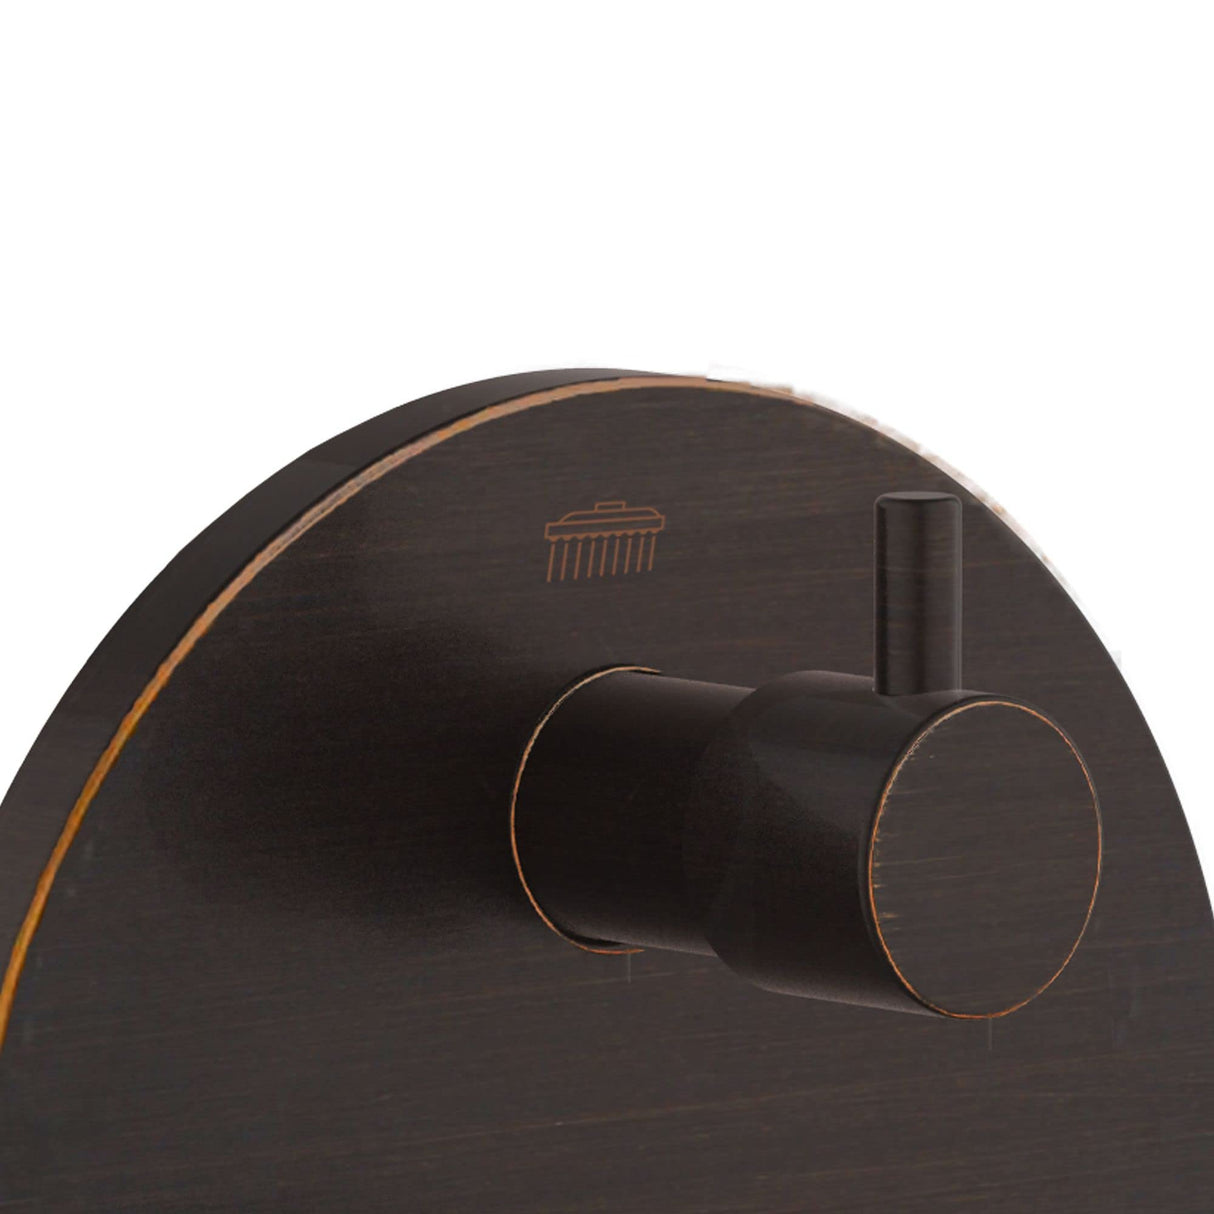 PULSE ShowerSpas 3005-RIVD-ORB Two Way Tru-Temp Pressure Balance 1/2" Rough-In Valve with Oil-Rubbed Bronze Trim Kit